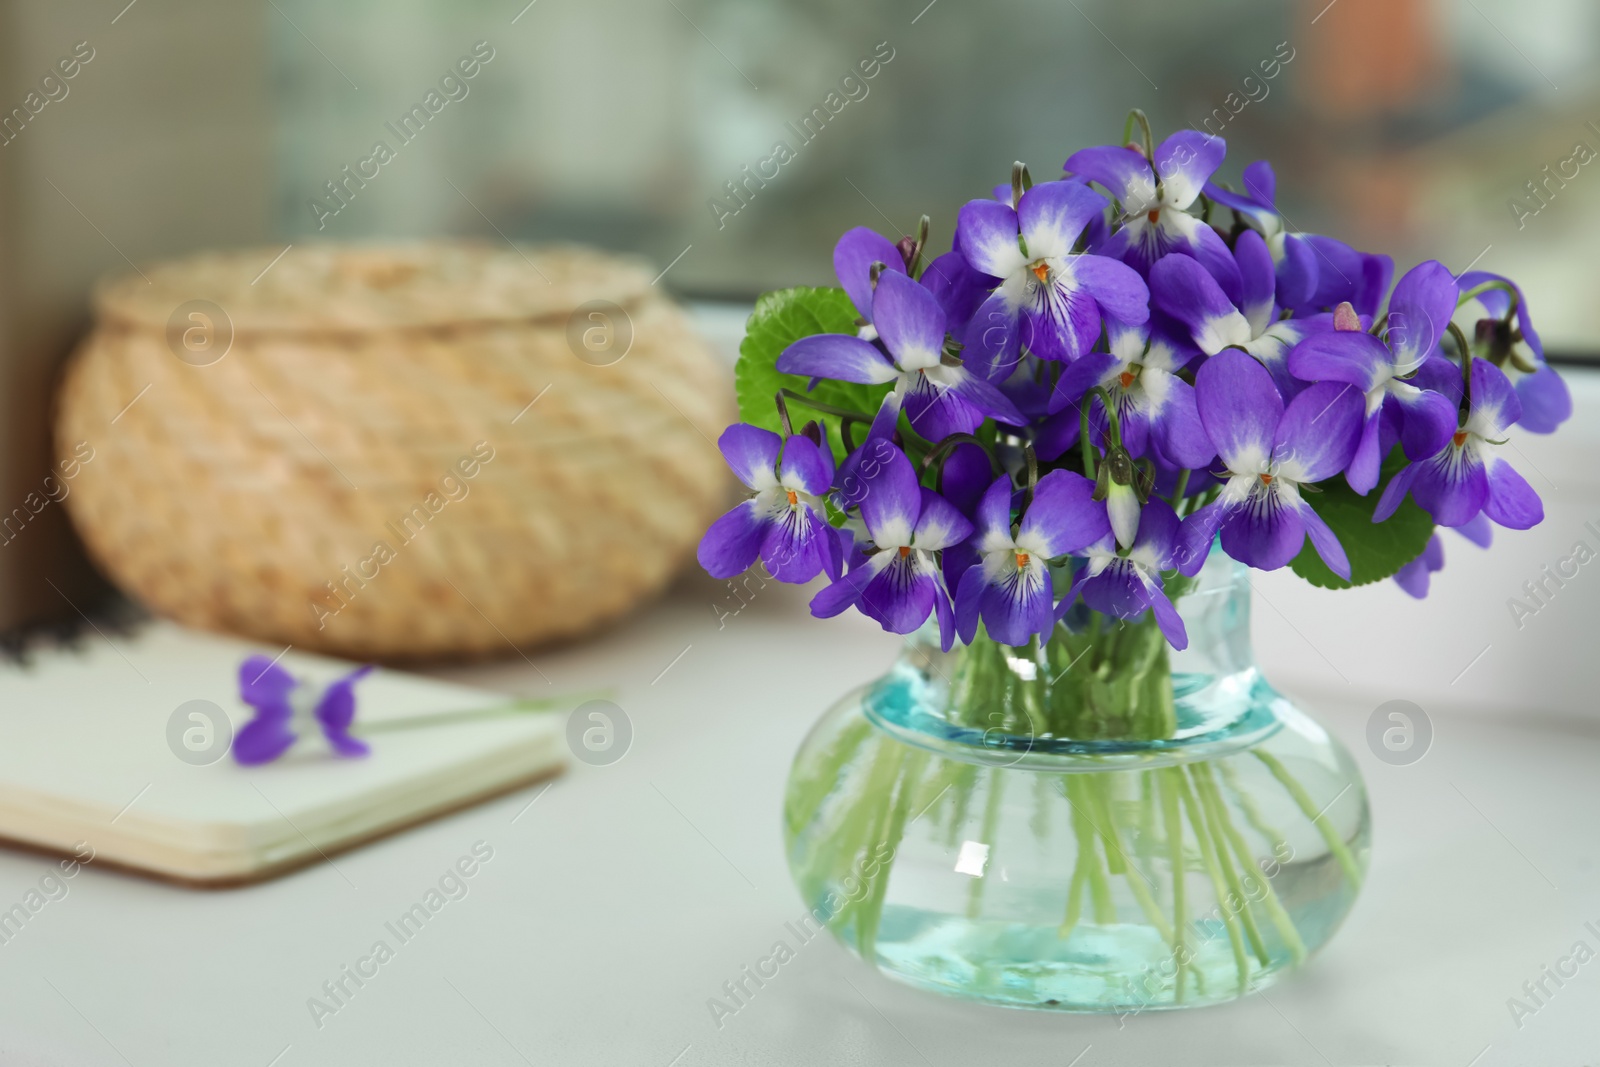 Photo of Beautiful wood violets in glass vase on window sill indoors, space for text. Spring flowers